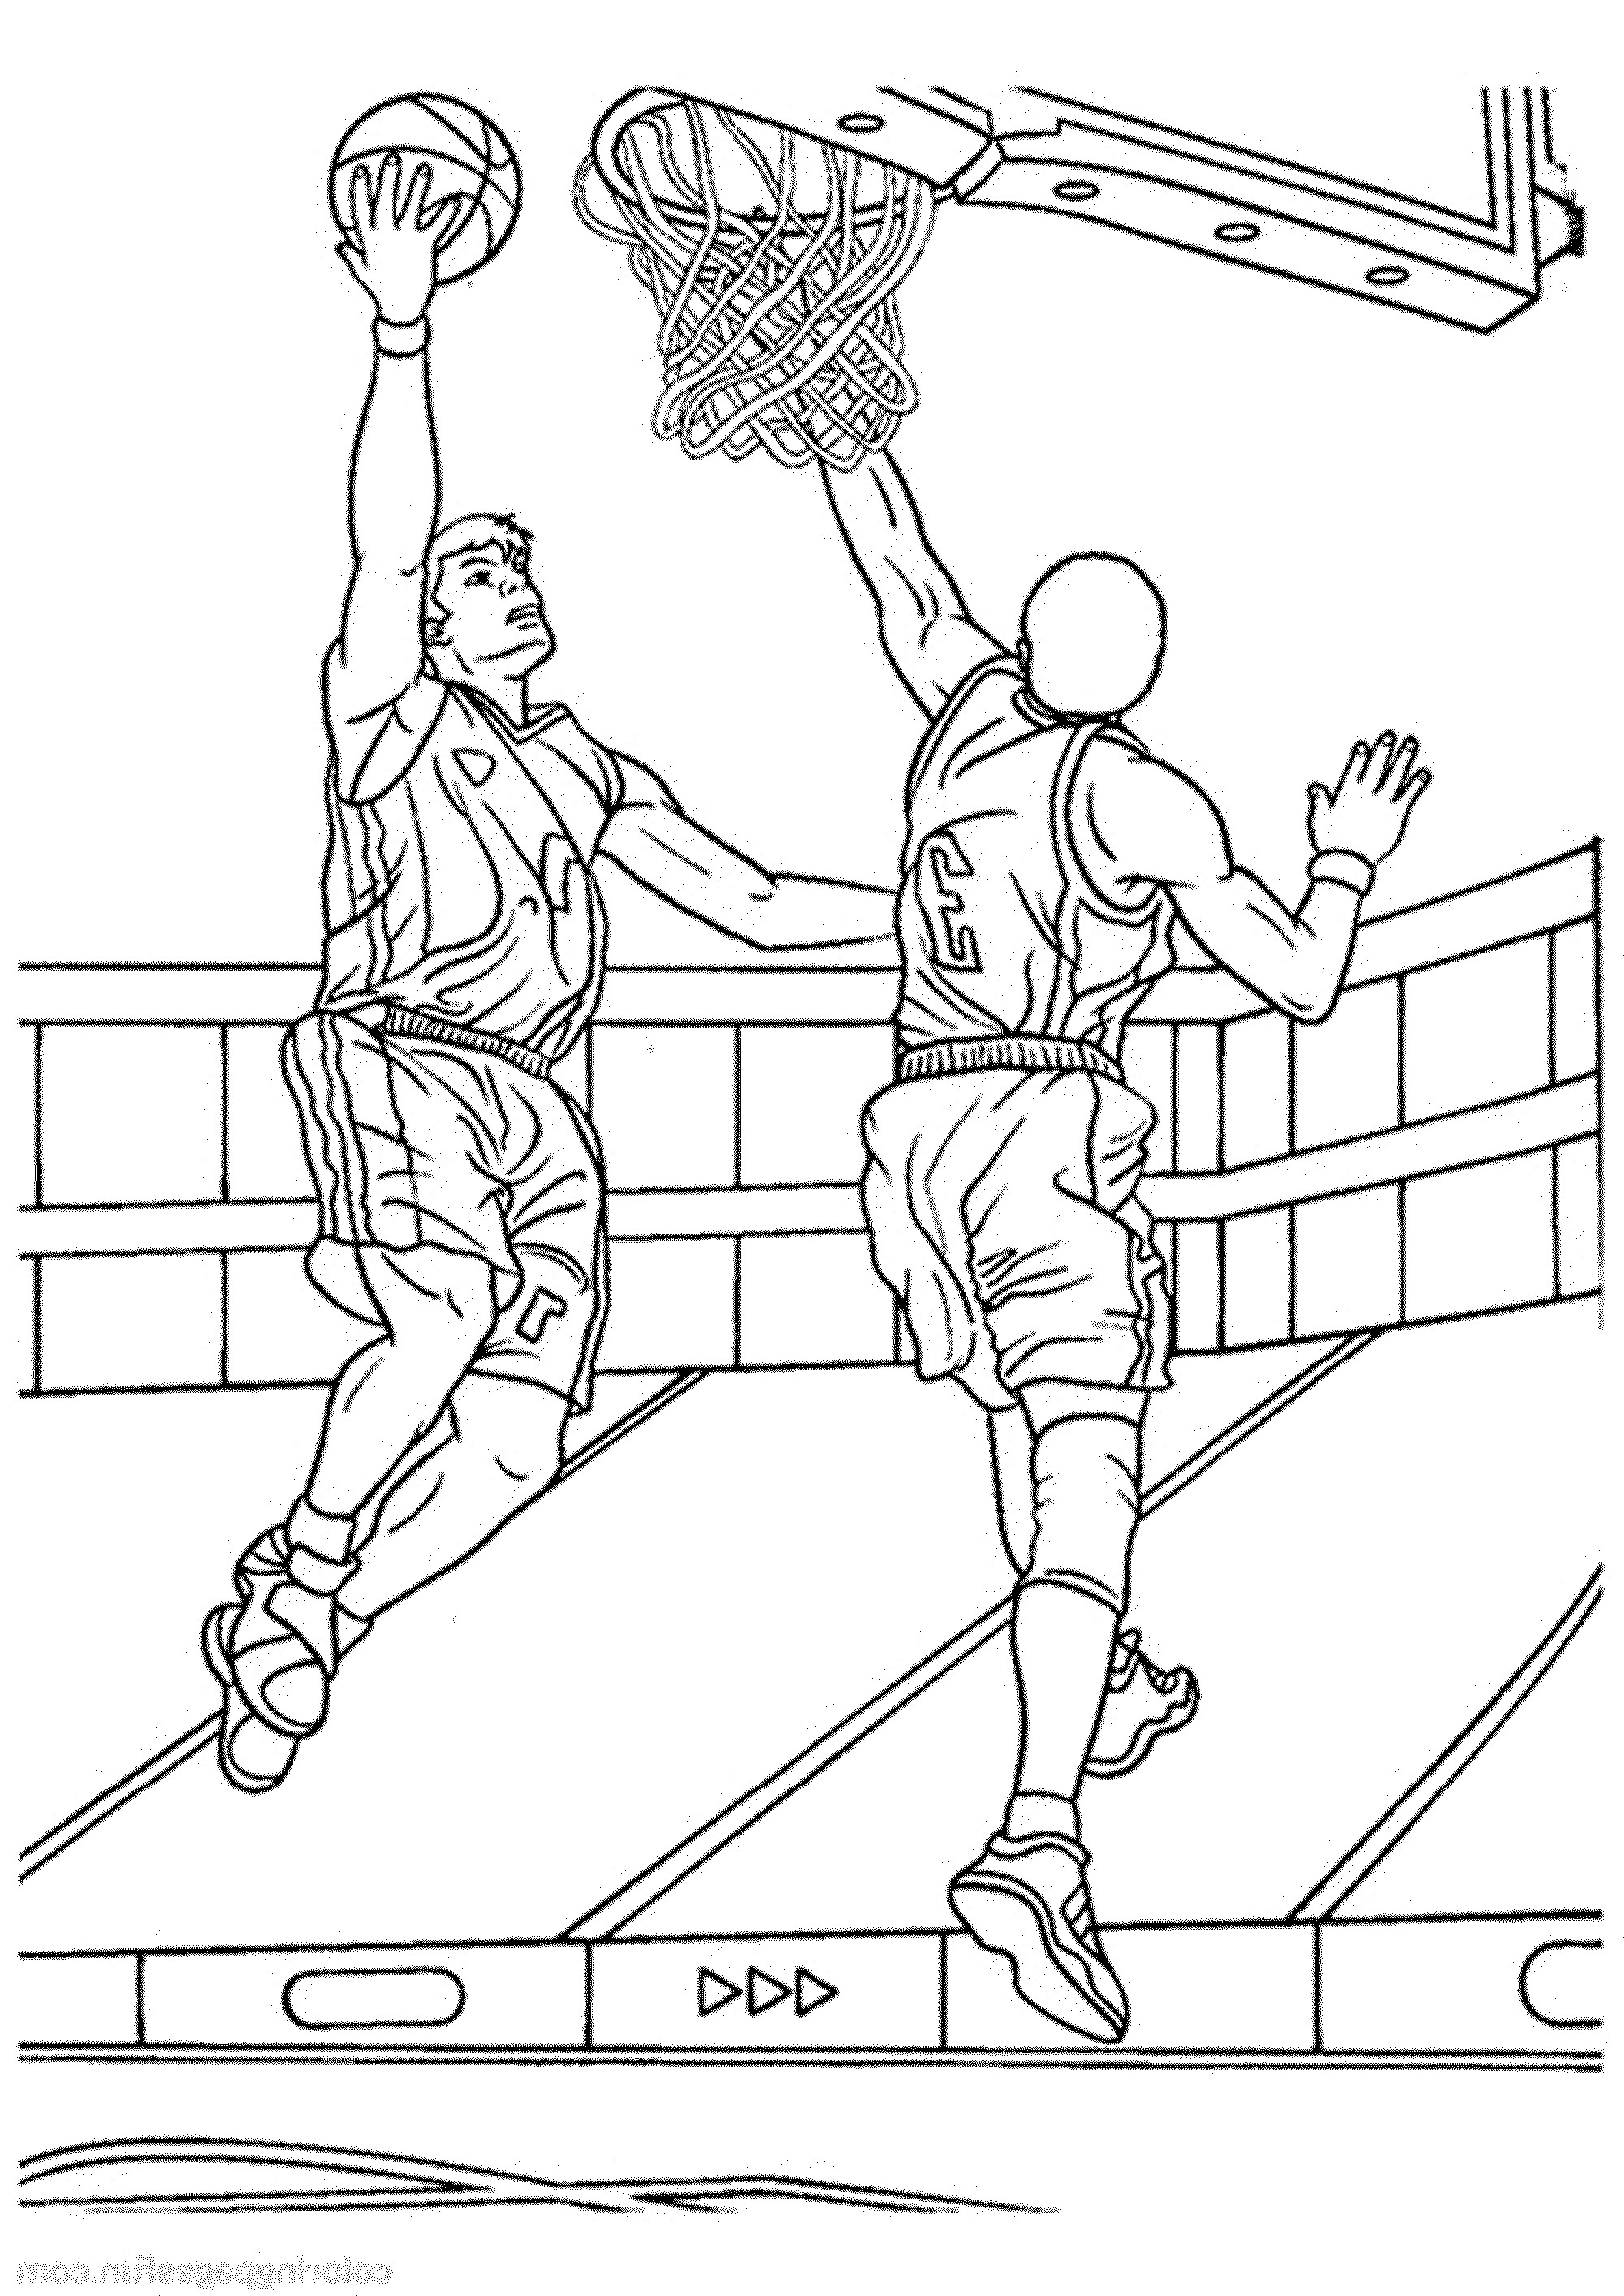 Basketball Player Coloring Pages
 Print & Download Interesting Basketball Coloring Pages